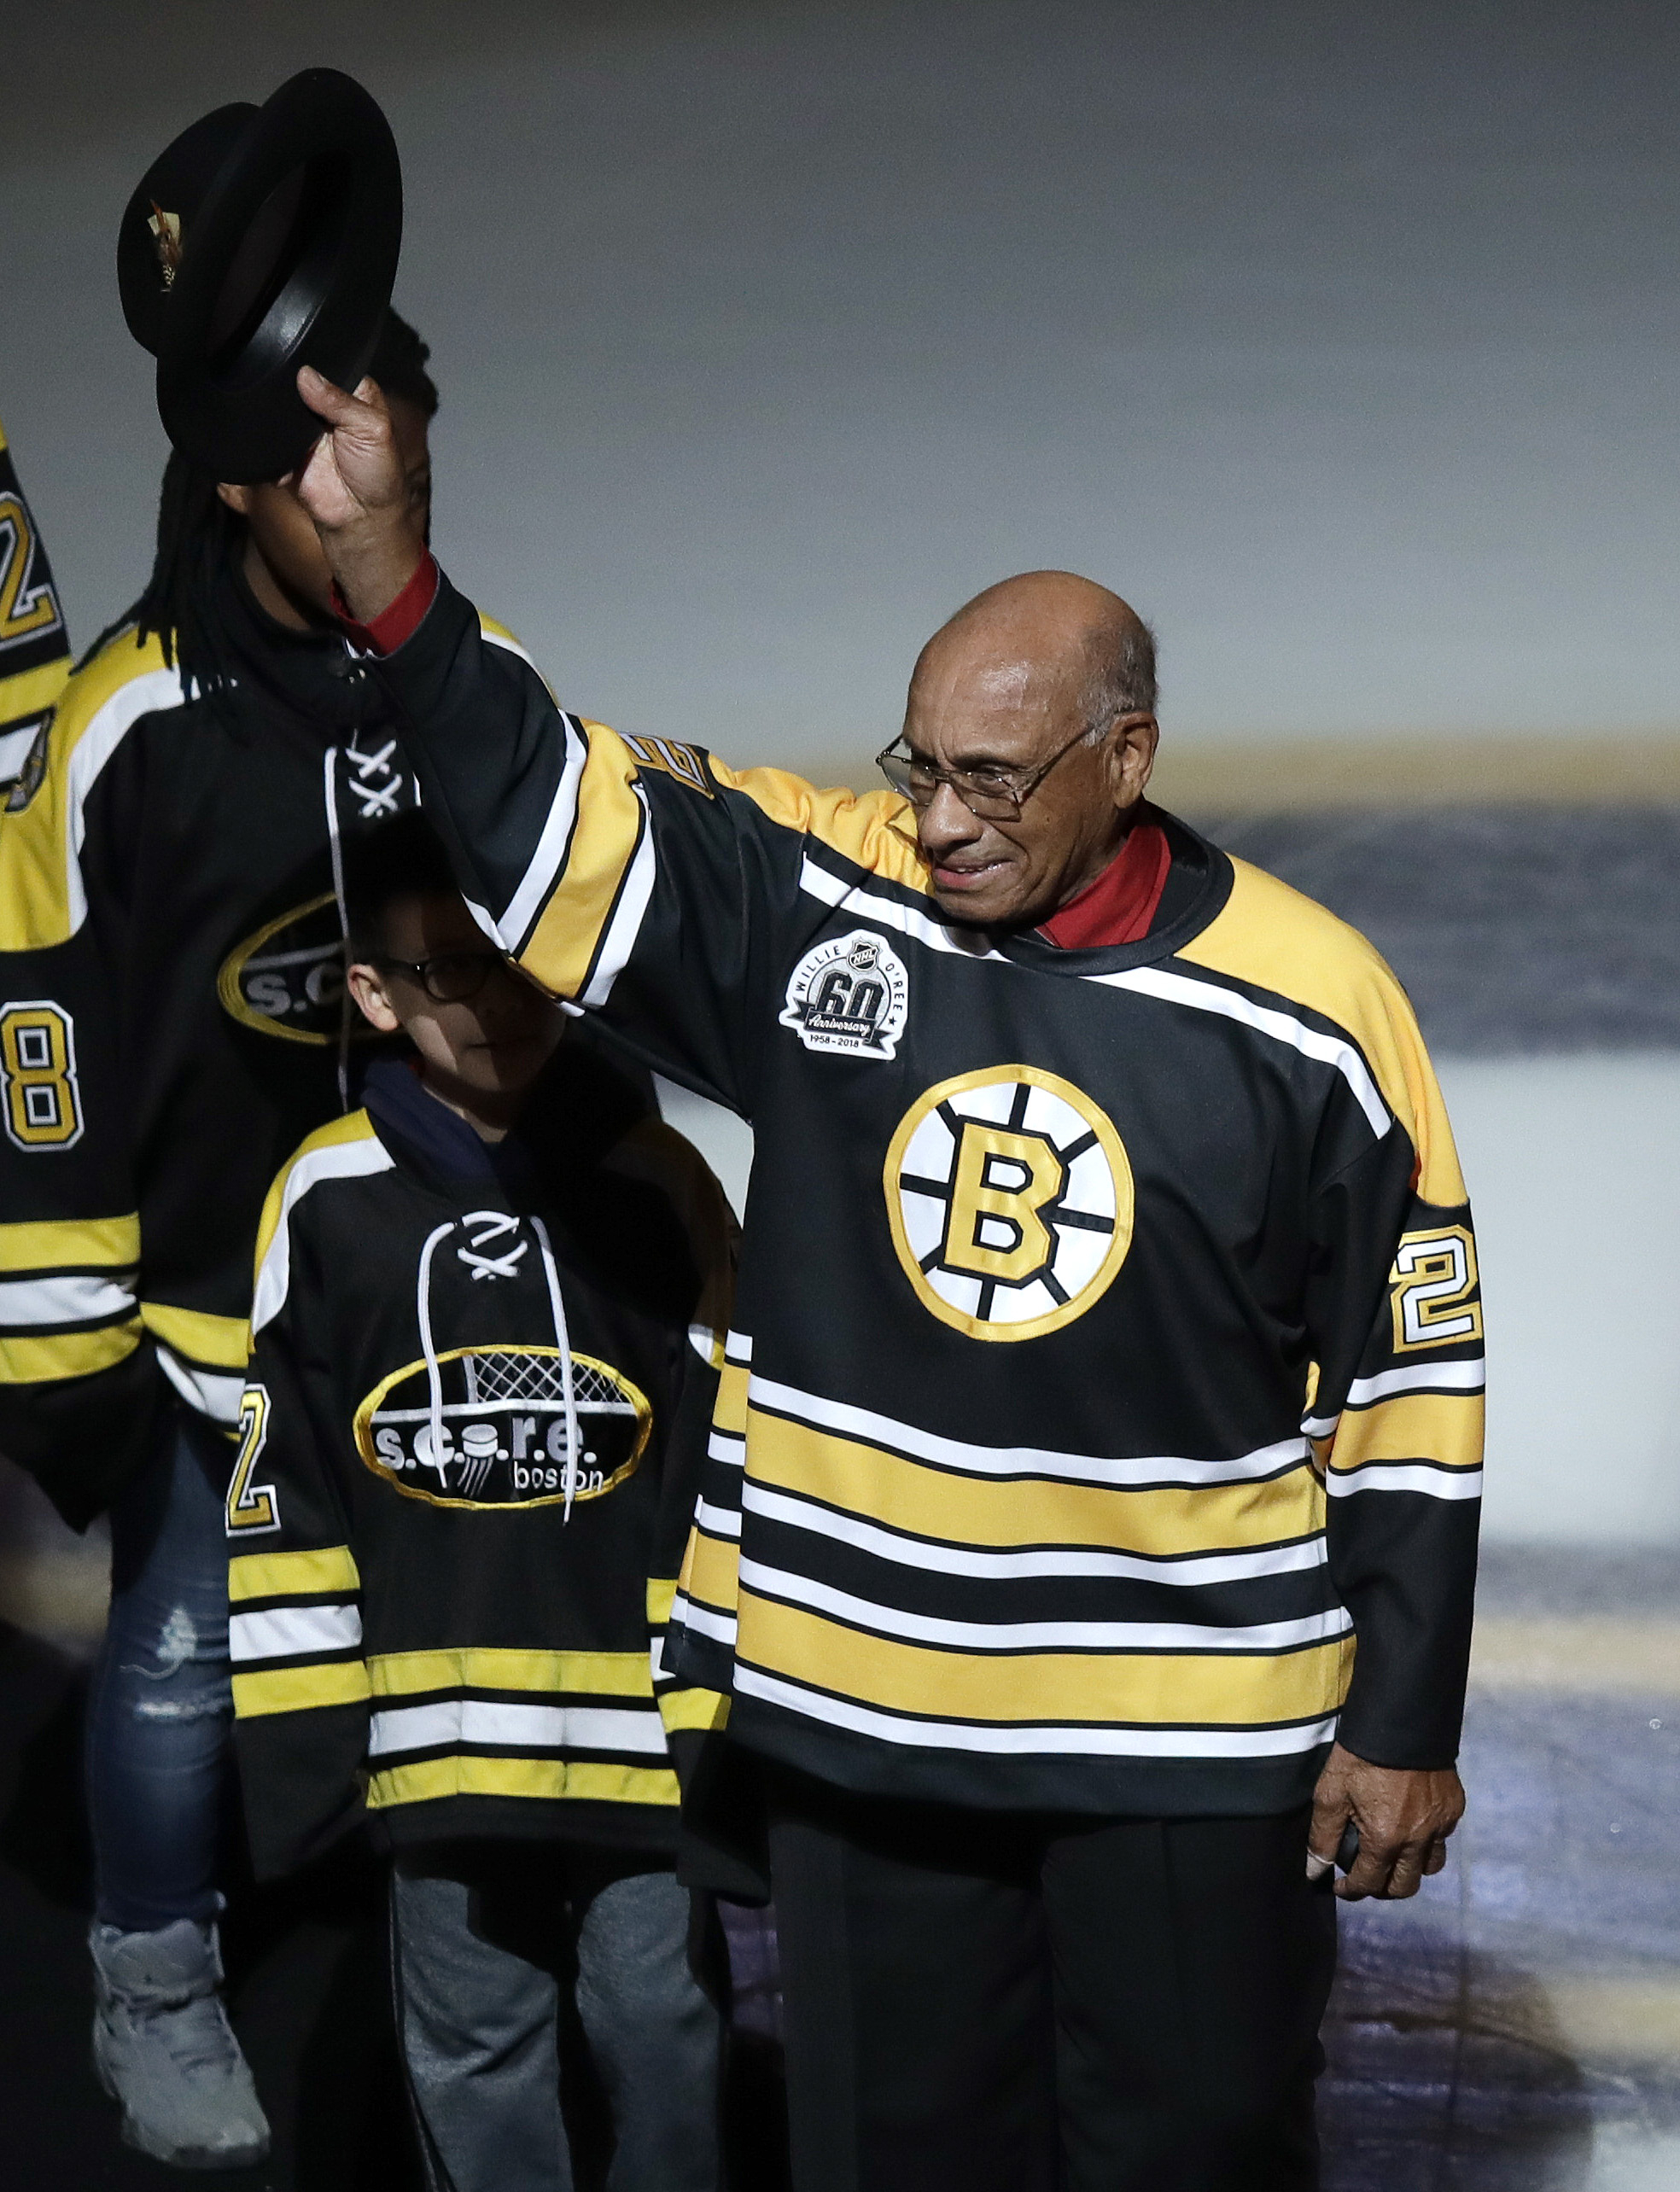 Willie O'Ree breaks the NHL's color barrier, 1958 - ™